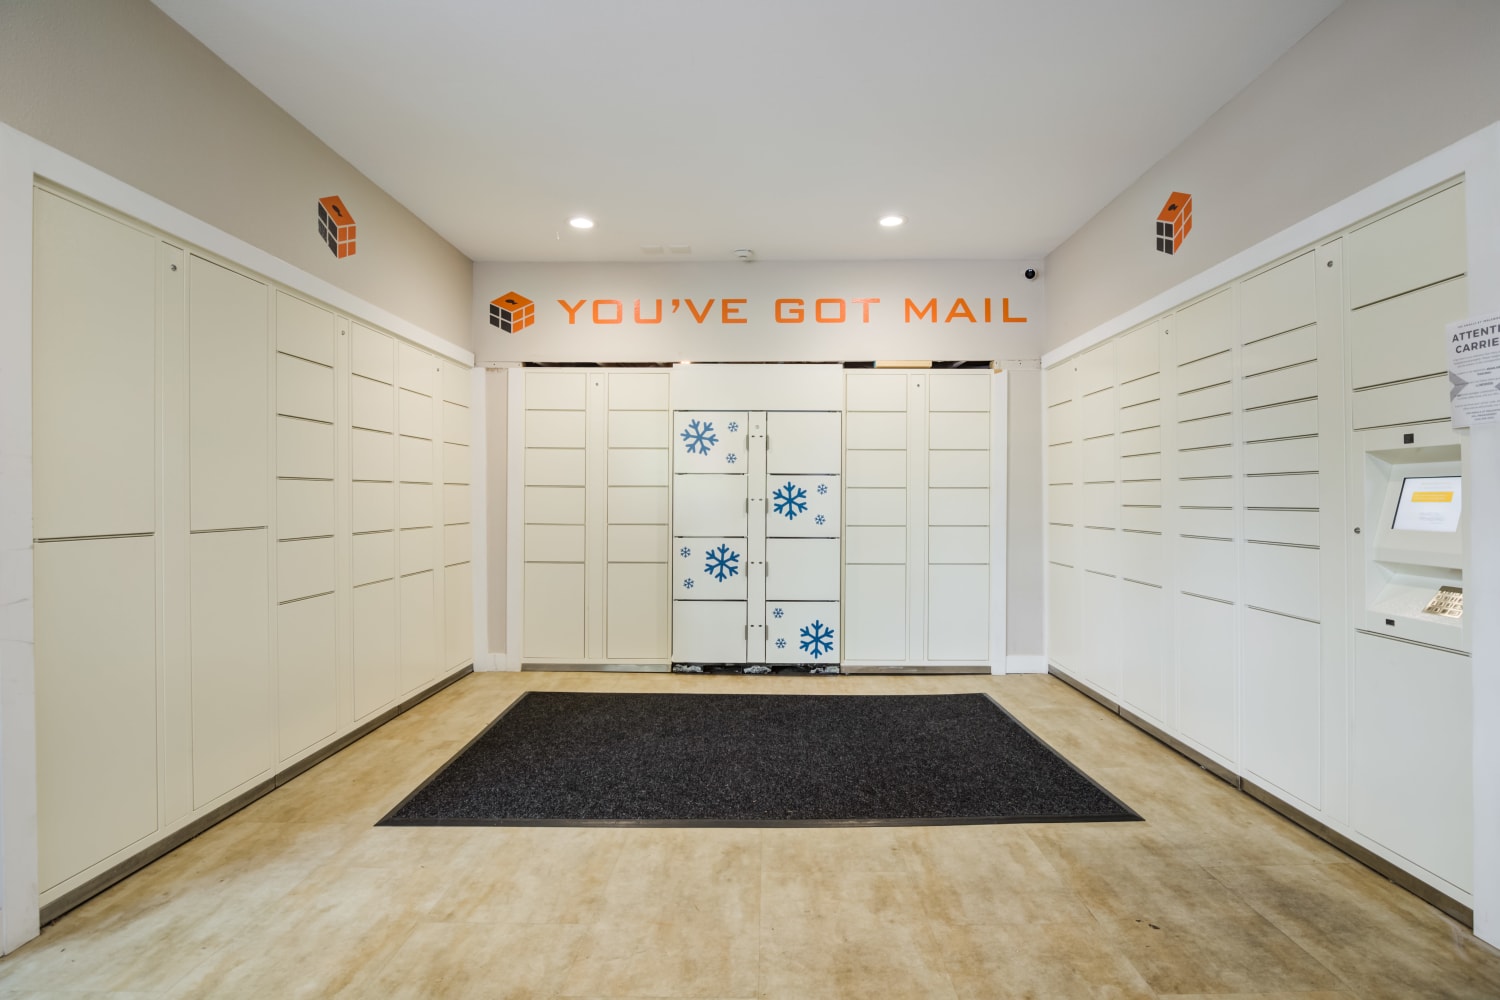 Mailroom and parcel pickup area at The Knolls at Inglewood Hill in Sammamish, Washington